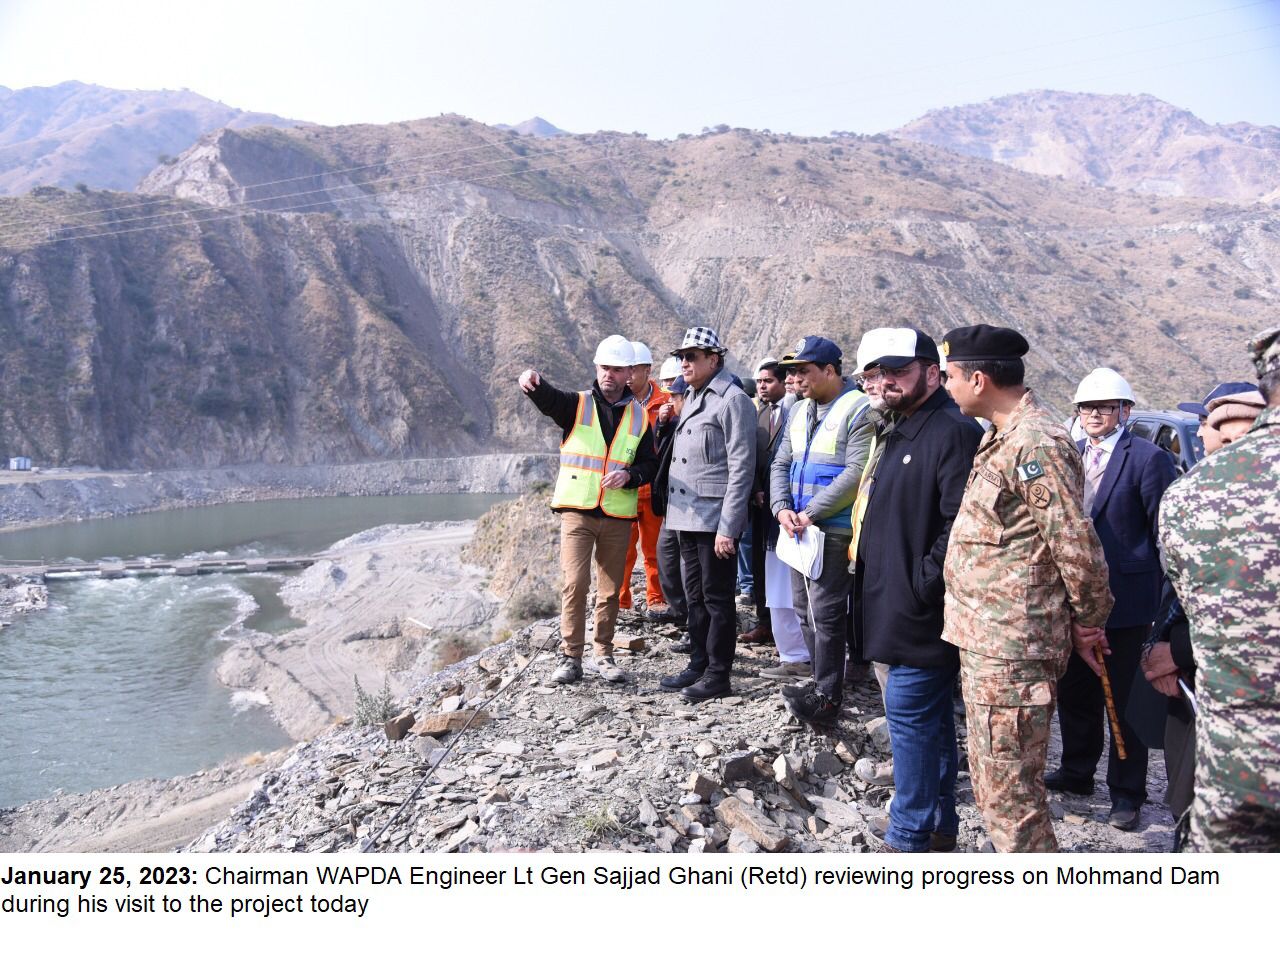 Mohmand Dam Project: Construction in progress on all 11 sites; Project likely to be completed in 2026.